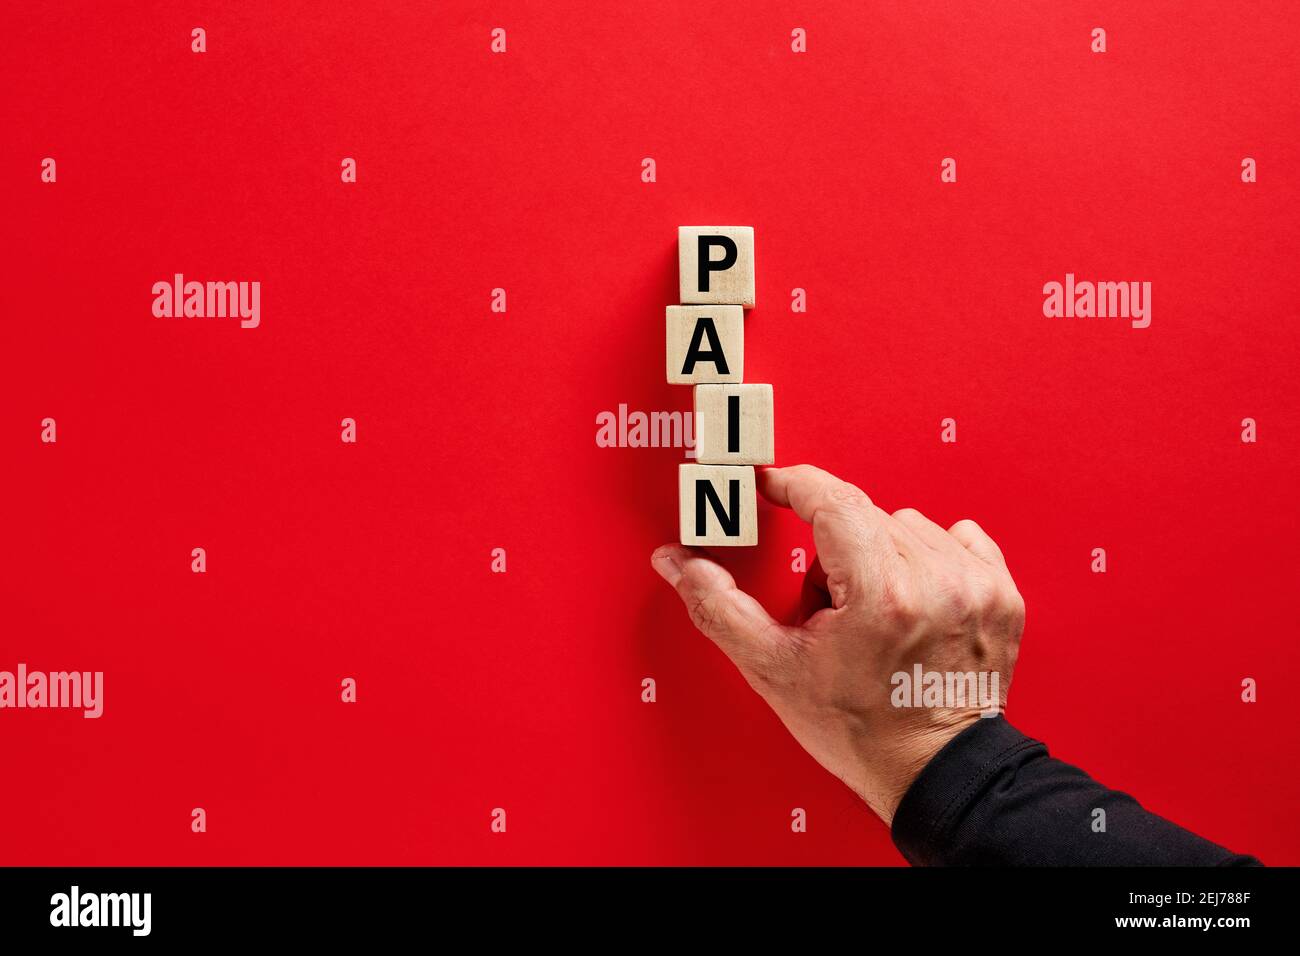 Male hand arranging the wooden blocks with the word pain on red background with copy space. Emotional, psychological or physical pain concept. Stock Photo